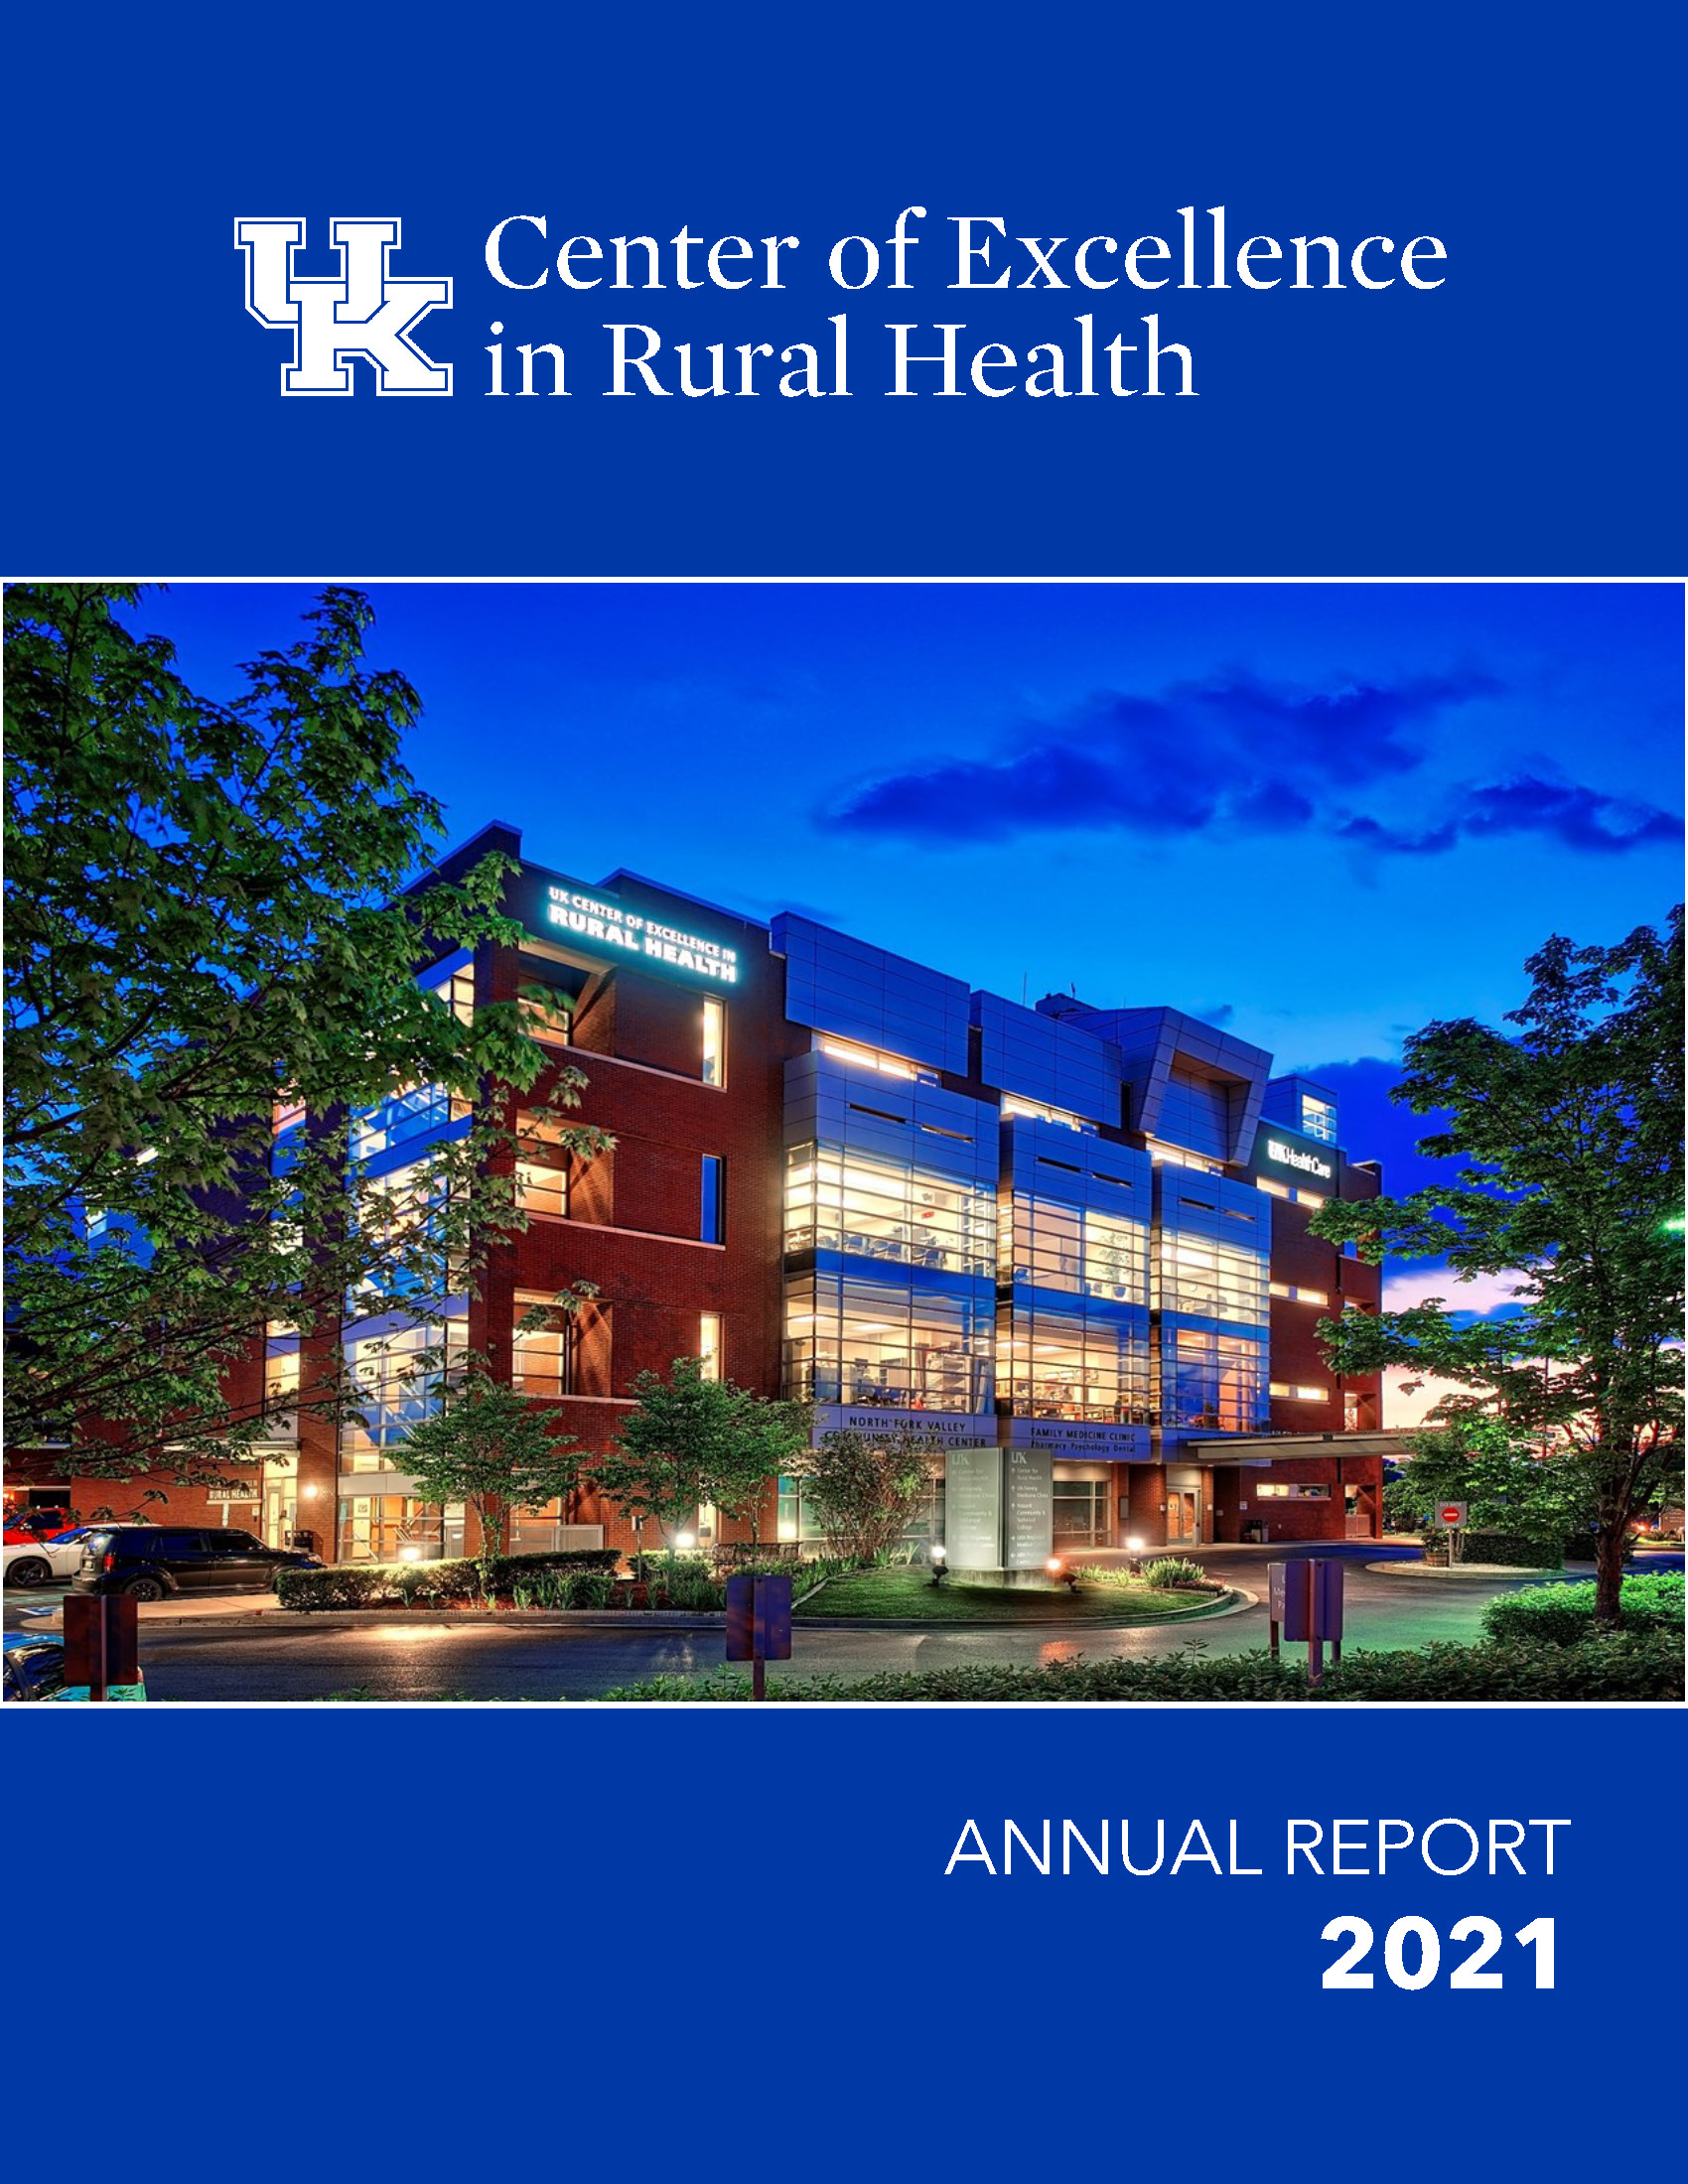 Photo of the 2021 Annual Report